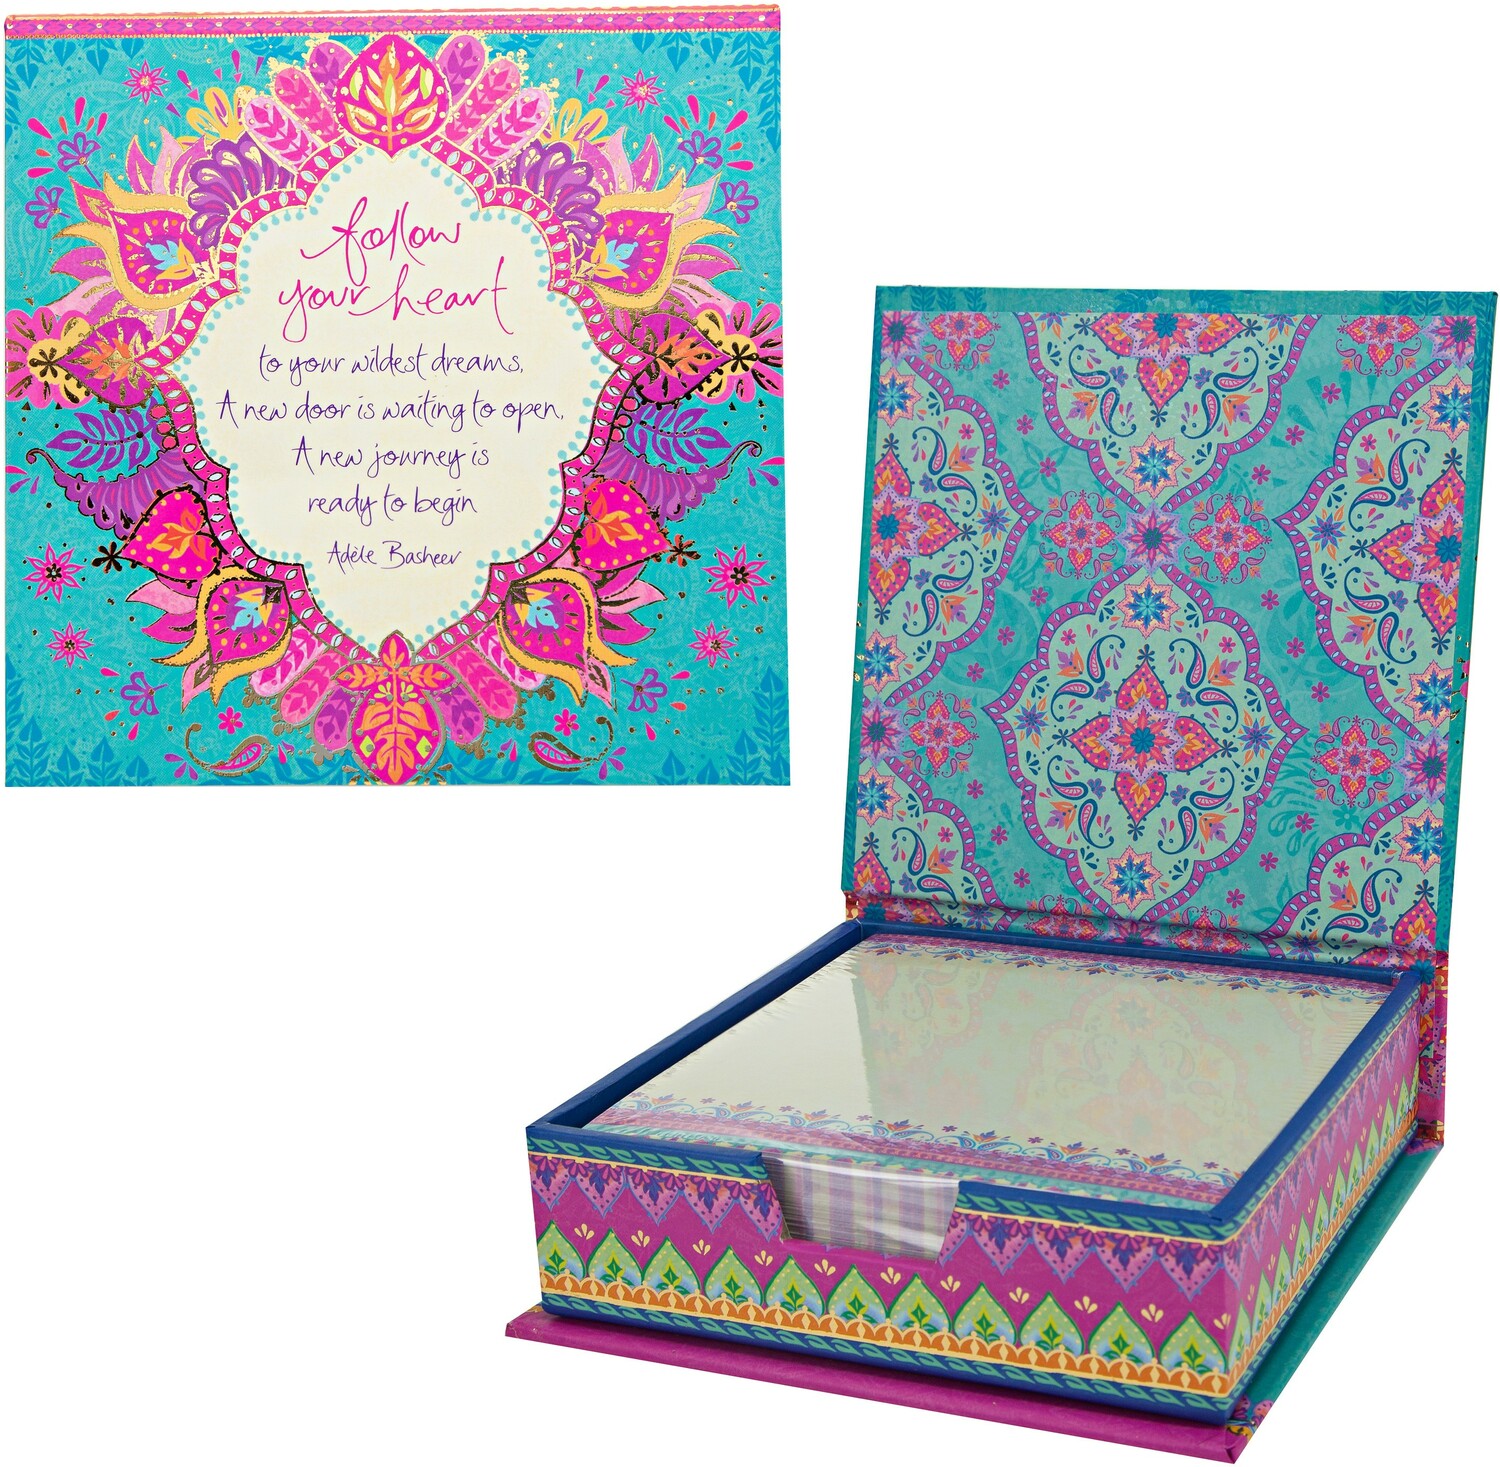 Follow Your Heart by Intrinsic - Follow Your Heart - 5.25" x 5.25" x 1.75" Note Box